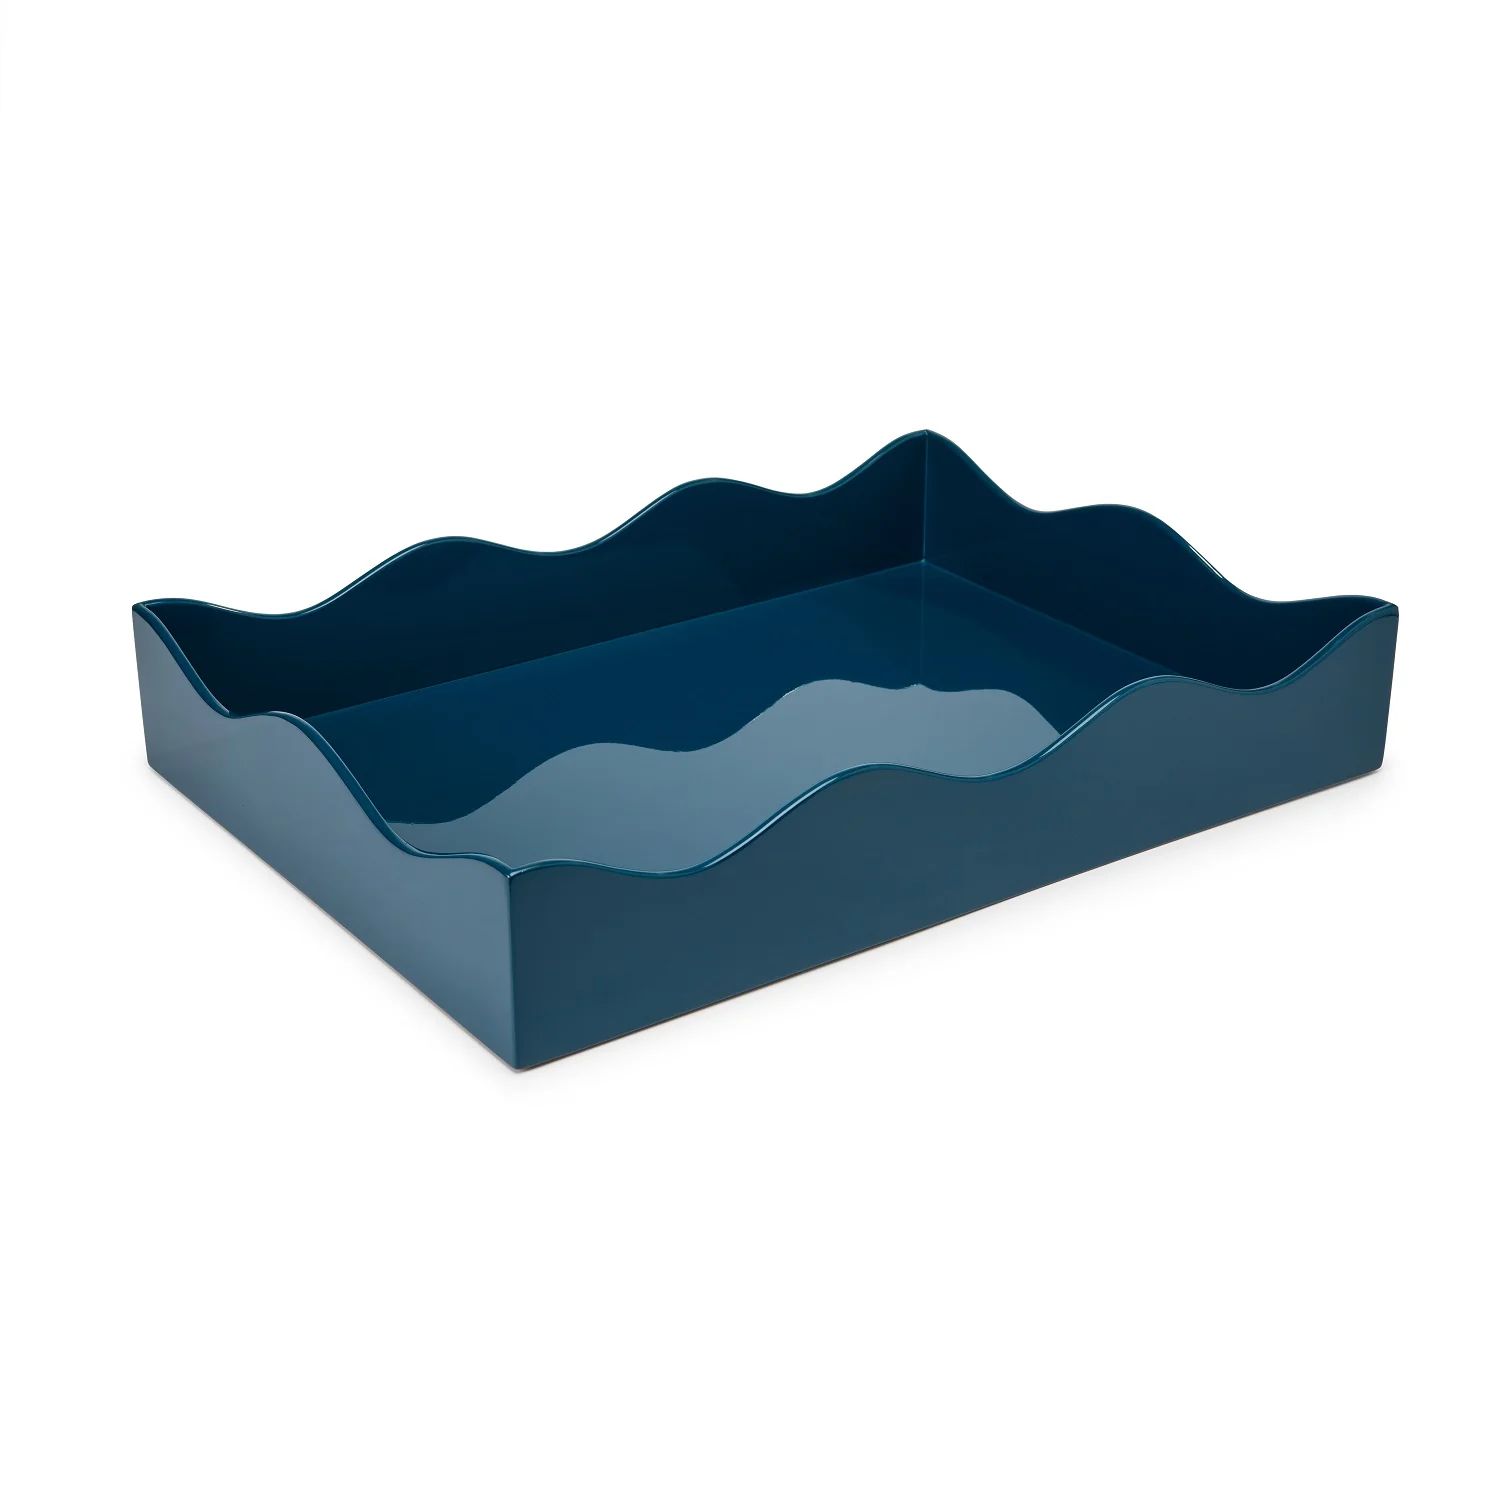 Large Lacquer Tray, Marine Blue, by The Lacquer Company
 – Paloma and Co. | Paloma & Co.